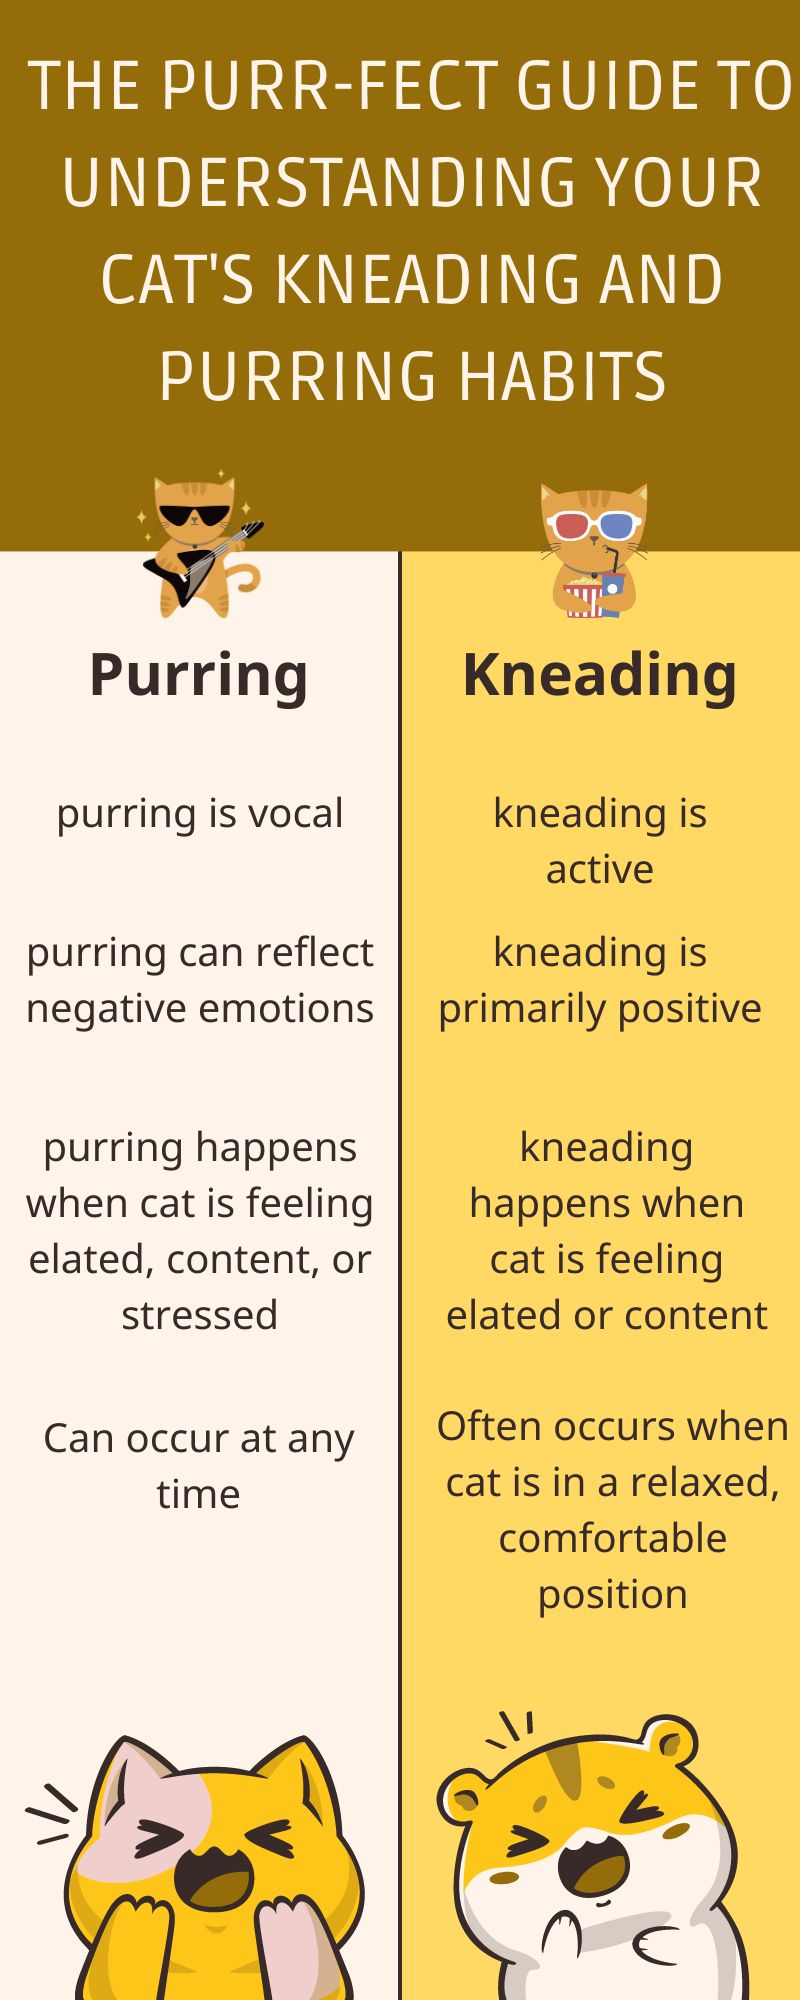 The Purr-fect Guide to Understanding Your Cat's Kneading and Purring Habits (Infographic)